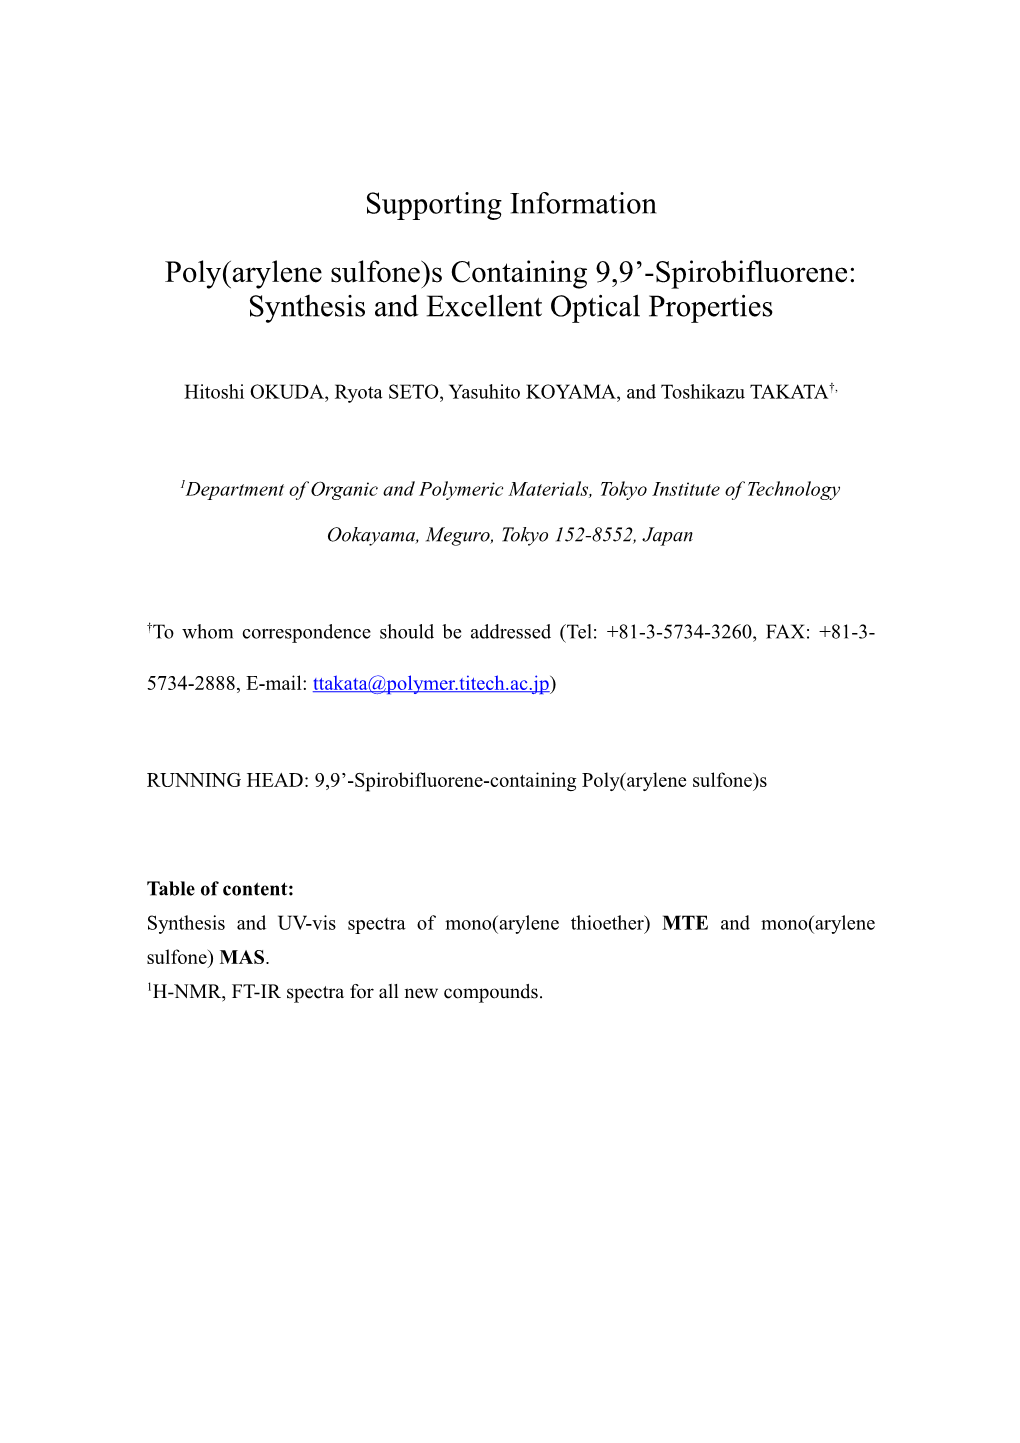 Poly(Arylene Sulfone)S Containing 9,9 -Spirobifluorene: Synthesis and Excellent Optical